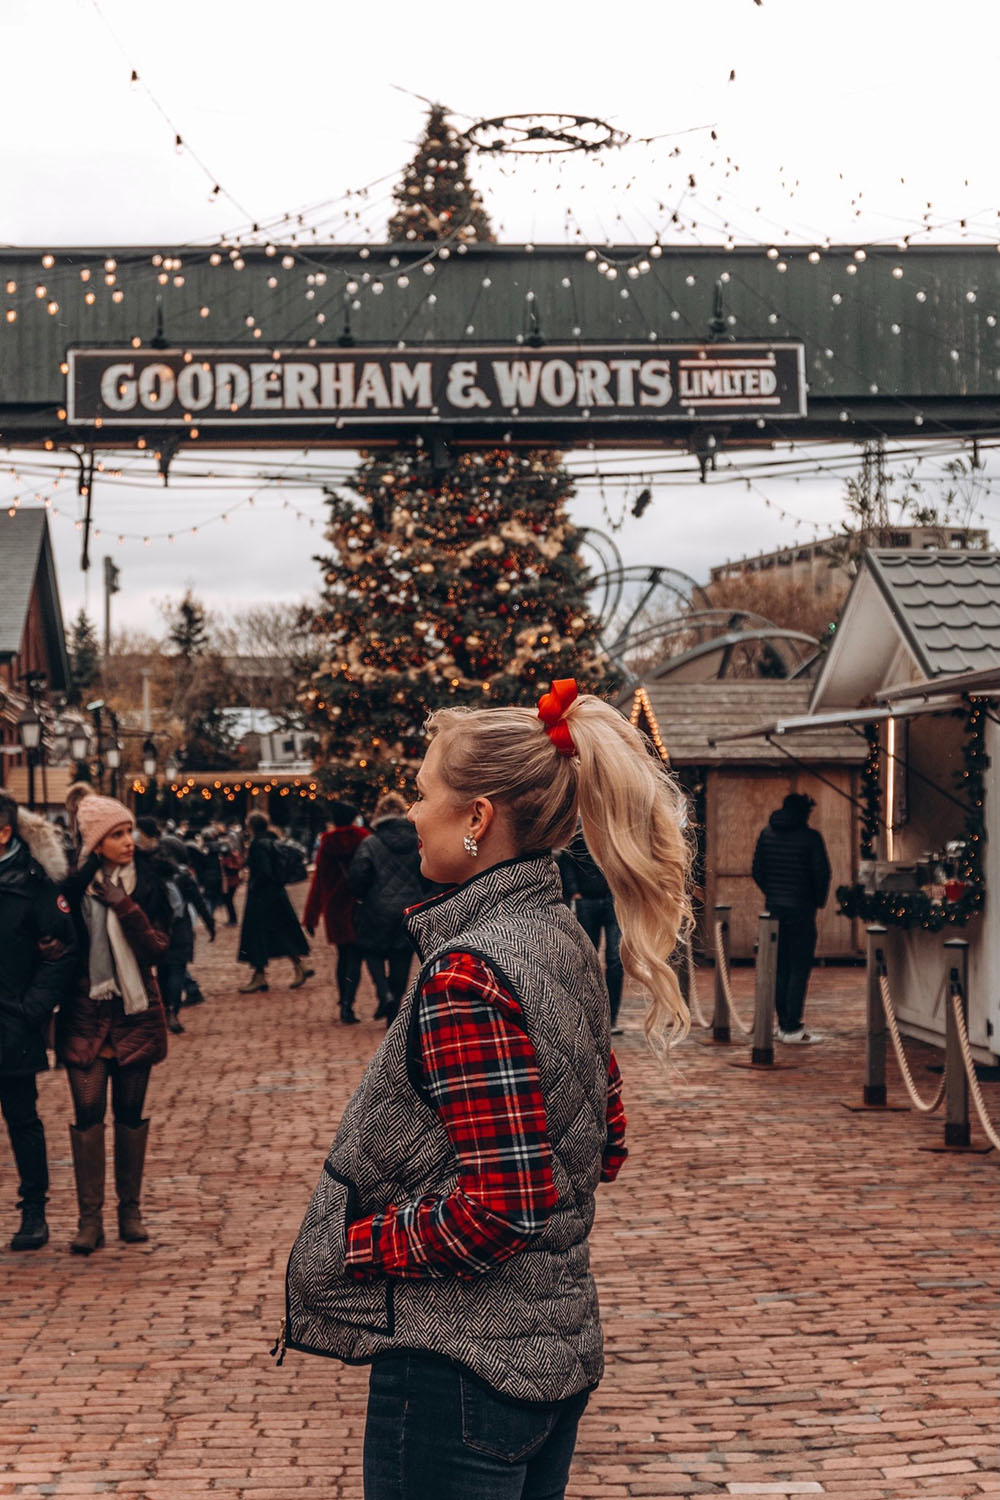 Looking for some cheap & free things in Toronto at Christmas time? This guide is for you! Toronto has so many incredibly fun & festive yet affordable activities to do during the Christmas season. From the Santa Claus parade to magical light displays, this guide includes all of the free and cheap activities to do in Toronto this holiday season. Pictured here: The Distillery Winter Village